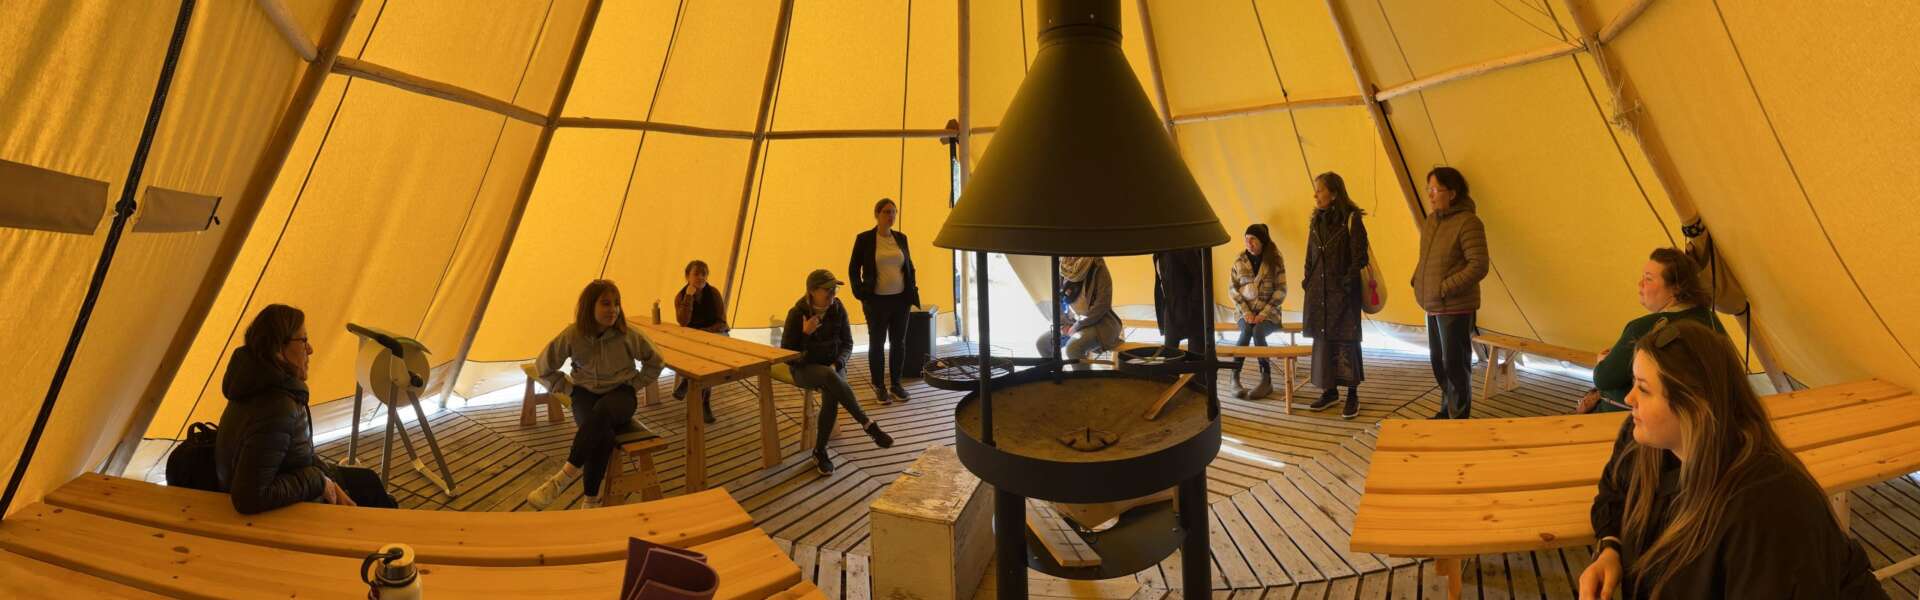 People sit on wooden benches inside a circular tent with a woodstove in the middle.